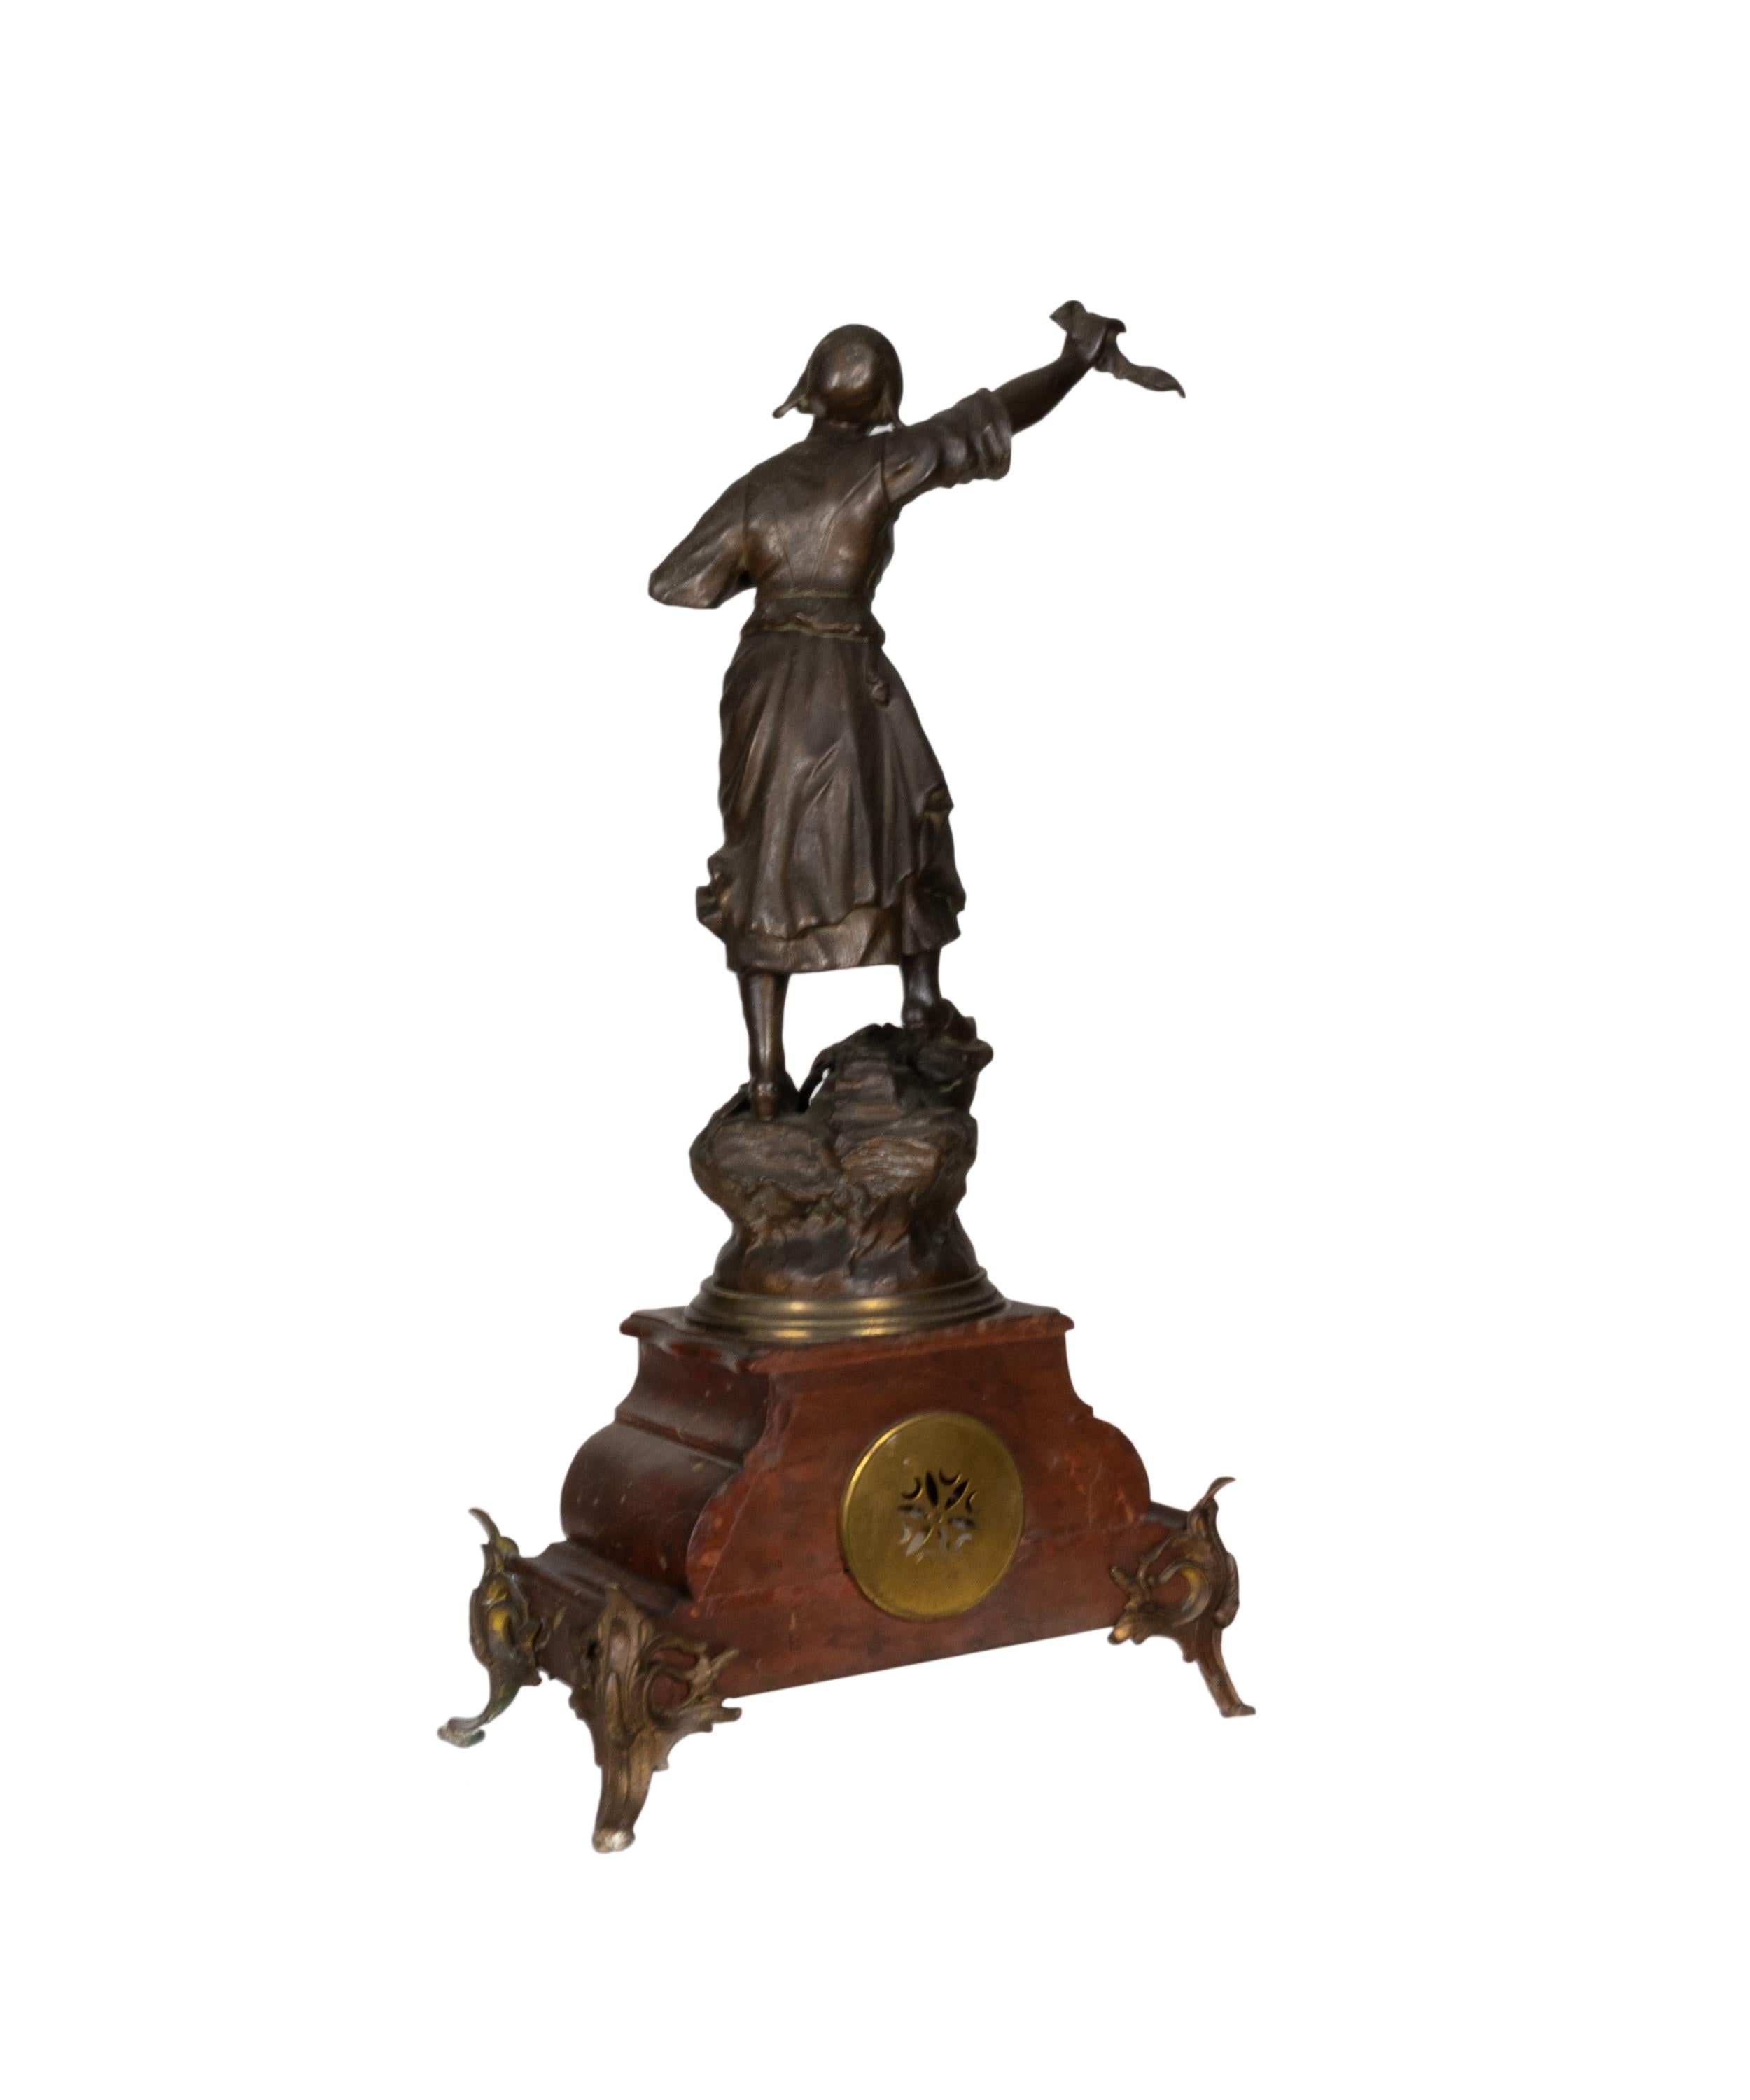 A complete and in working order metal mantel clock with an esteemed figure of the Revolutionary french peasant woman with Carrara marble details and a function swiss mechanism. 